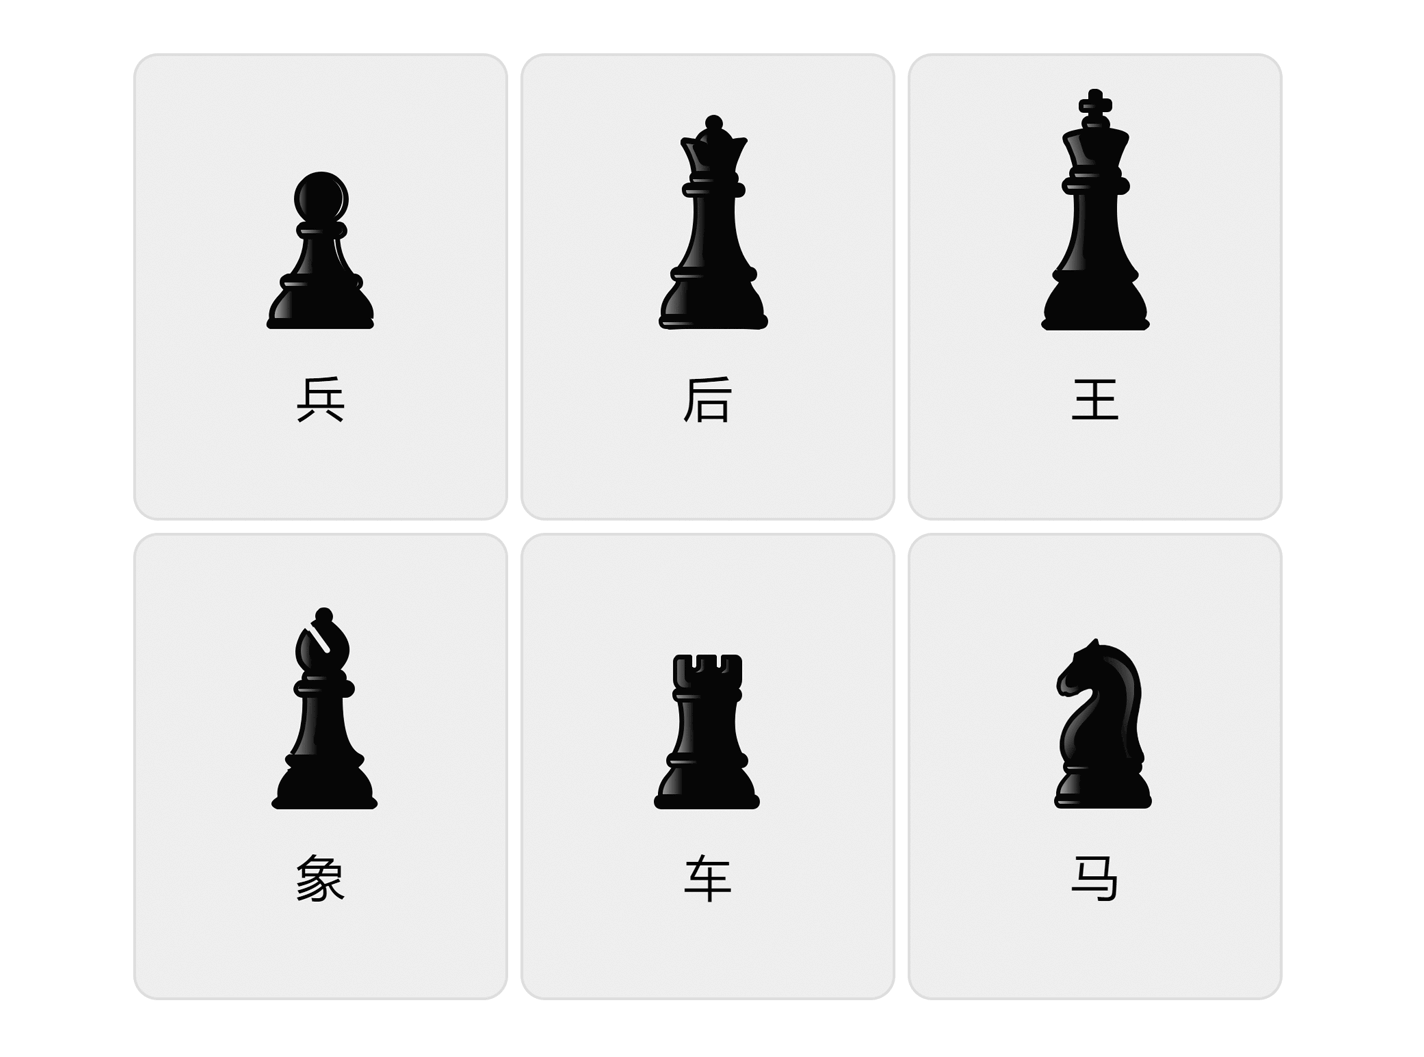 Chess Pieces in Mandarin Chinese